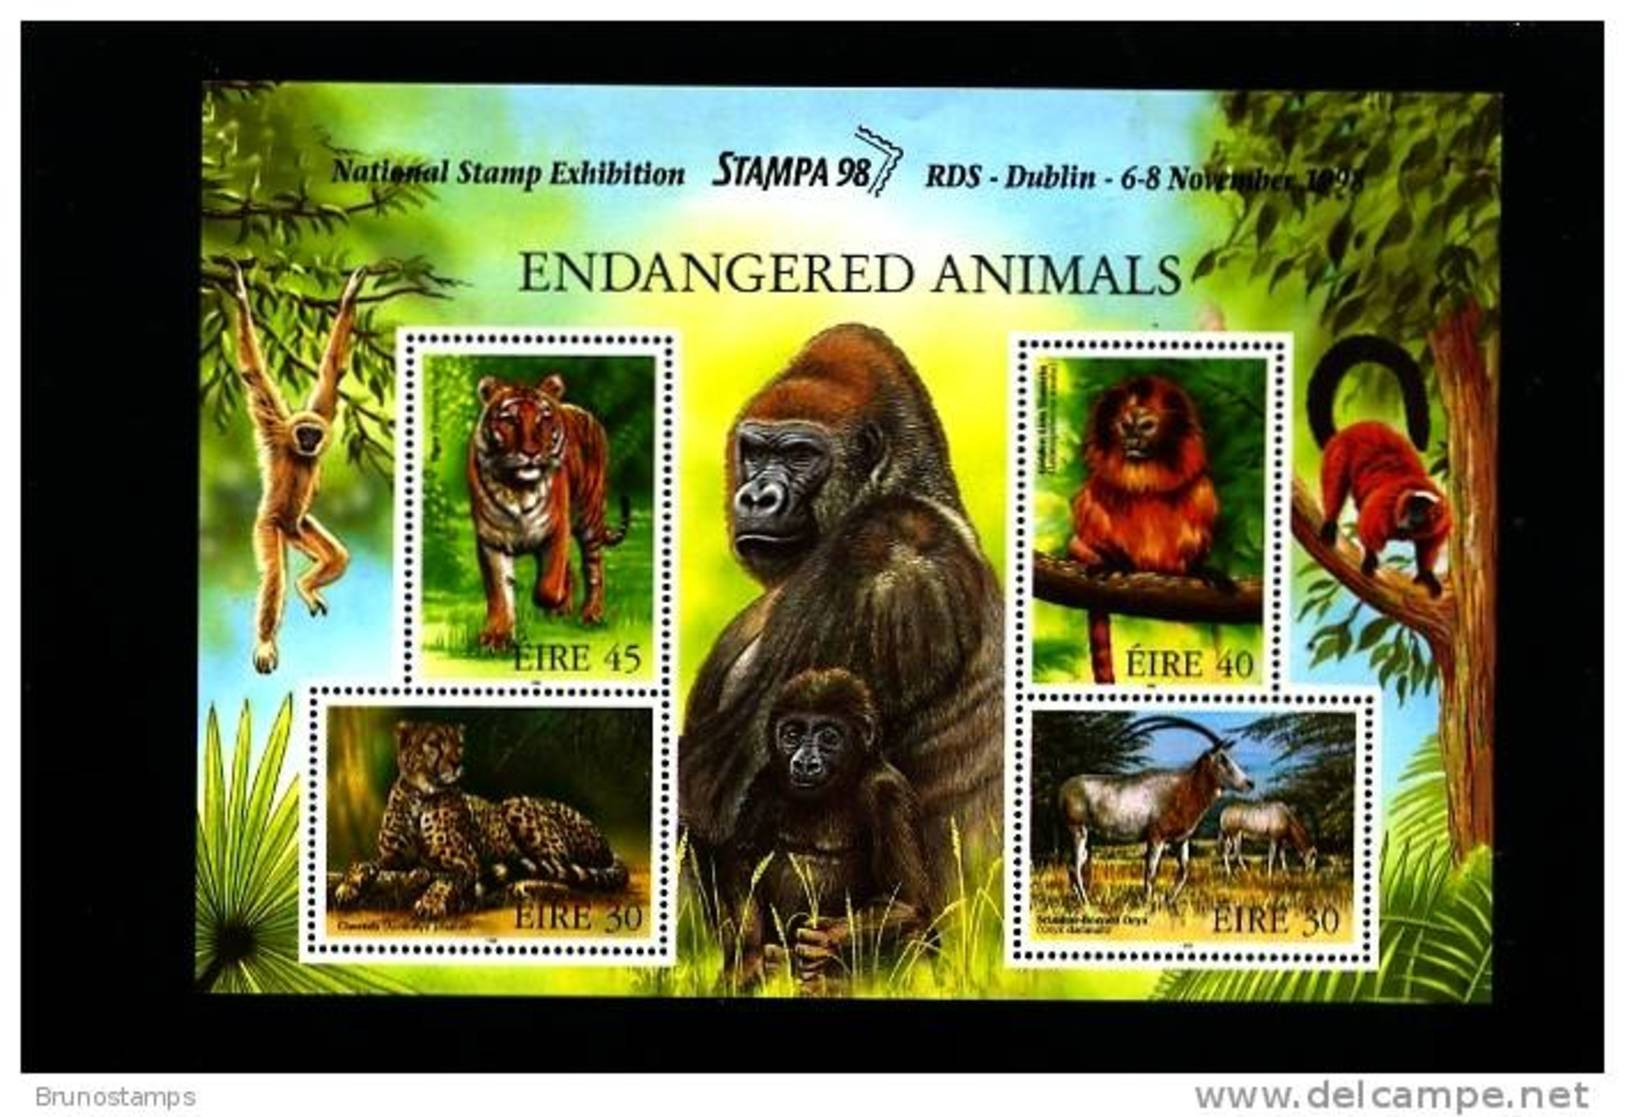 IRELAND/EIRE - 1998  ENDANGERED ANIMALS  MS  OVERPRINTED STAMPA 98  MINT NH - Hojas Y Bloques